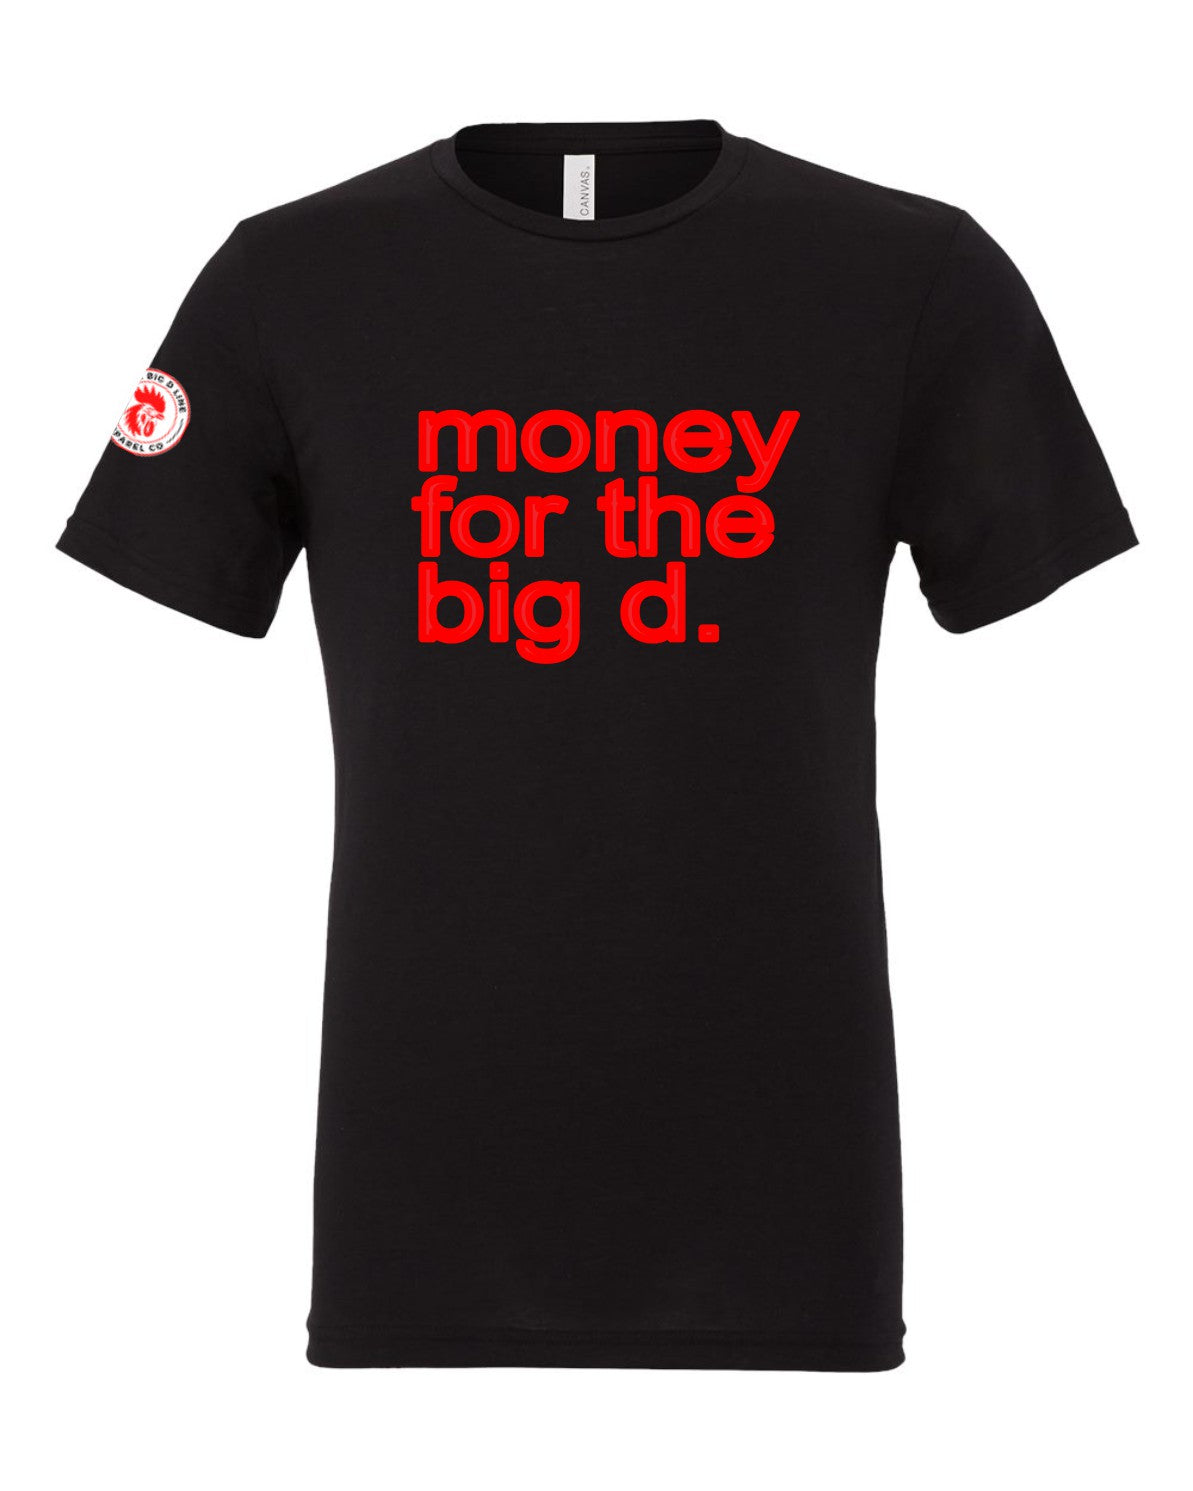 Money for the Big D Tee